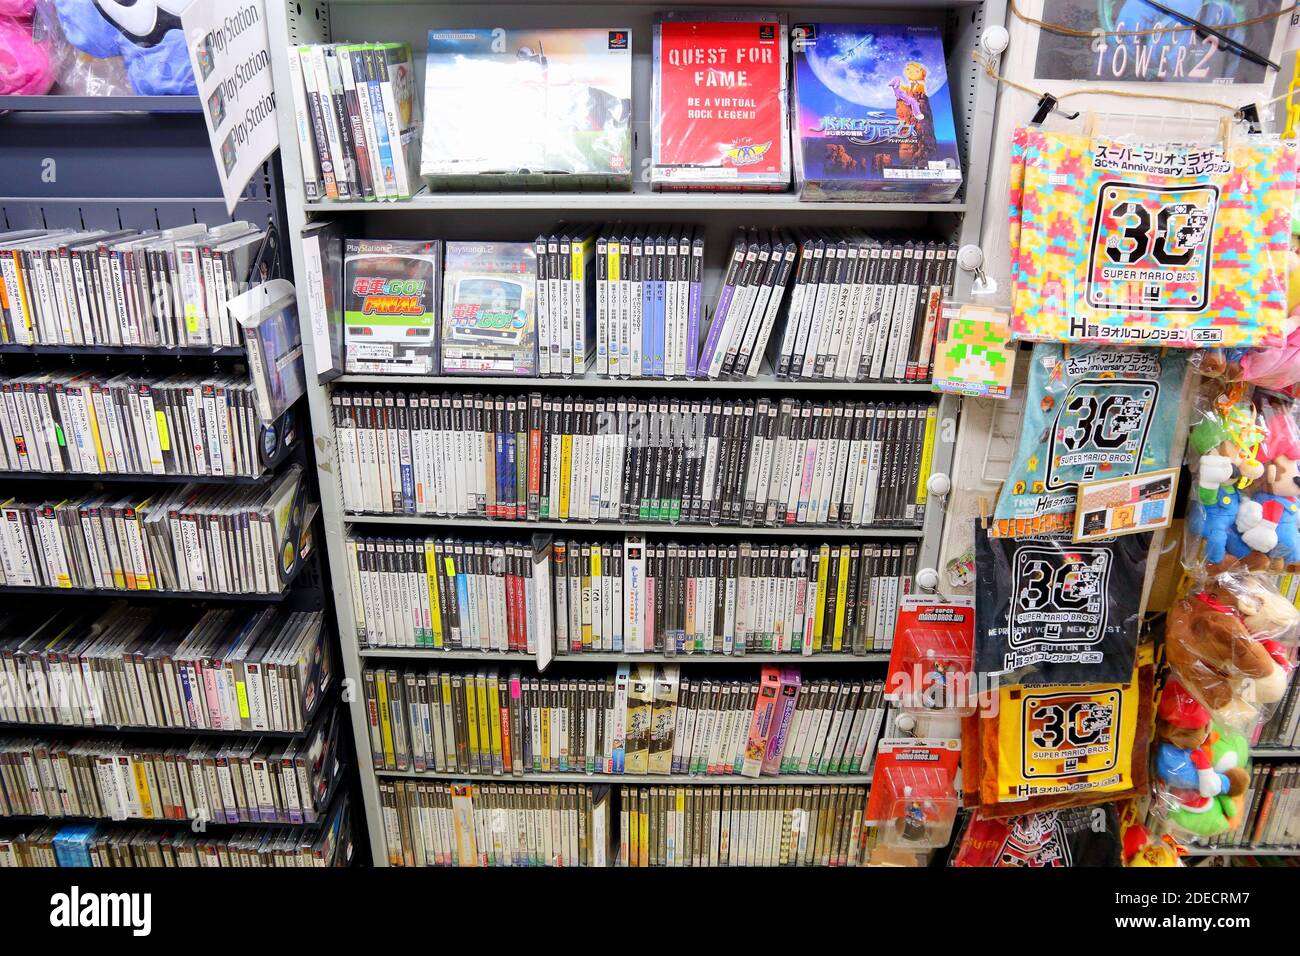 TOKYO, JAPAN - DECEMBER 4, 2016: Retro gaming collectible store in Akihabara district of Tokyo, Japan. Akihabara Electric District specializes in anim Stock Photo